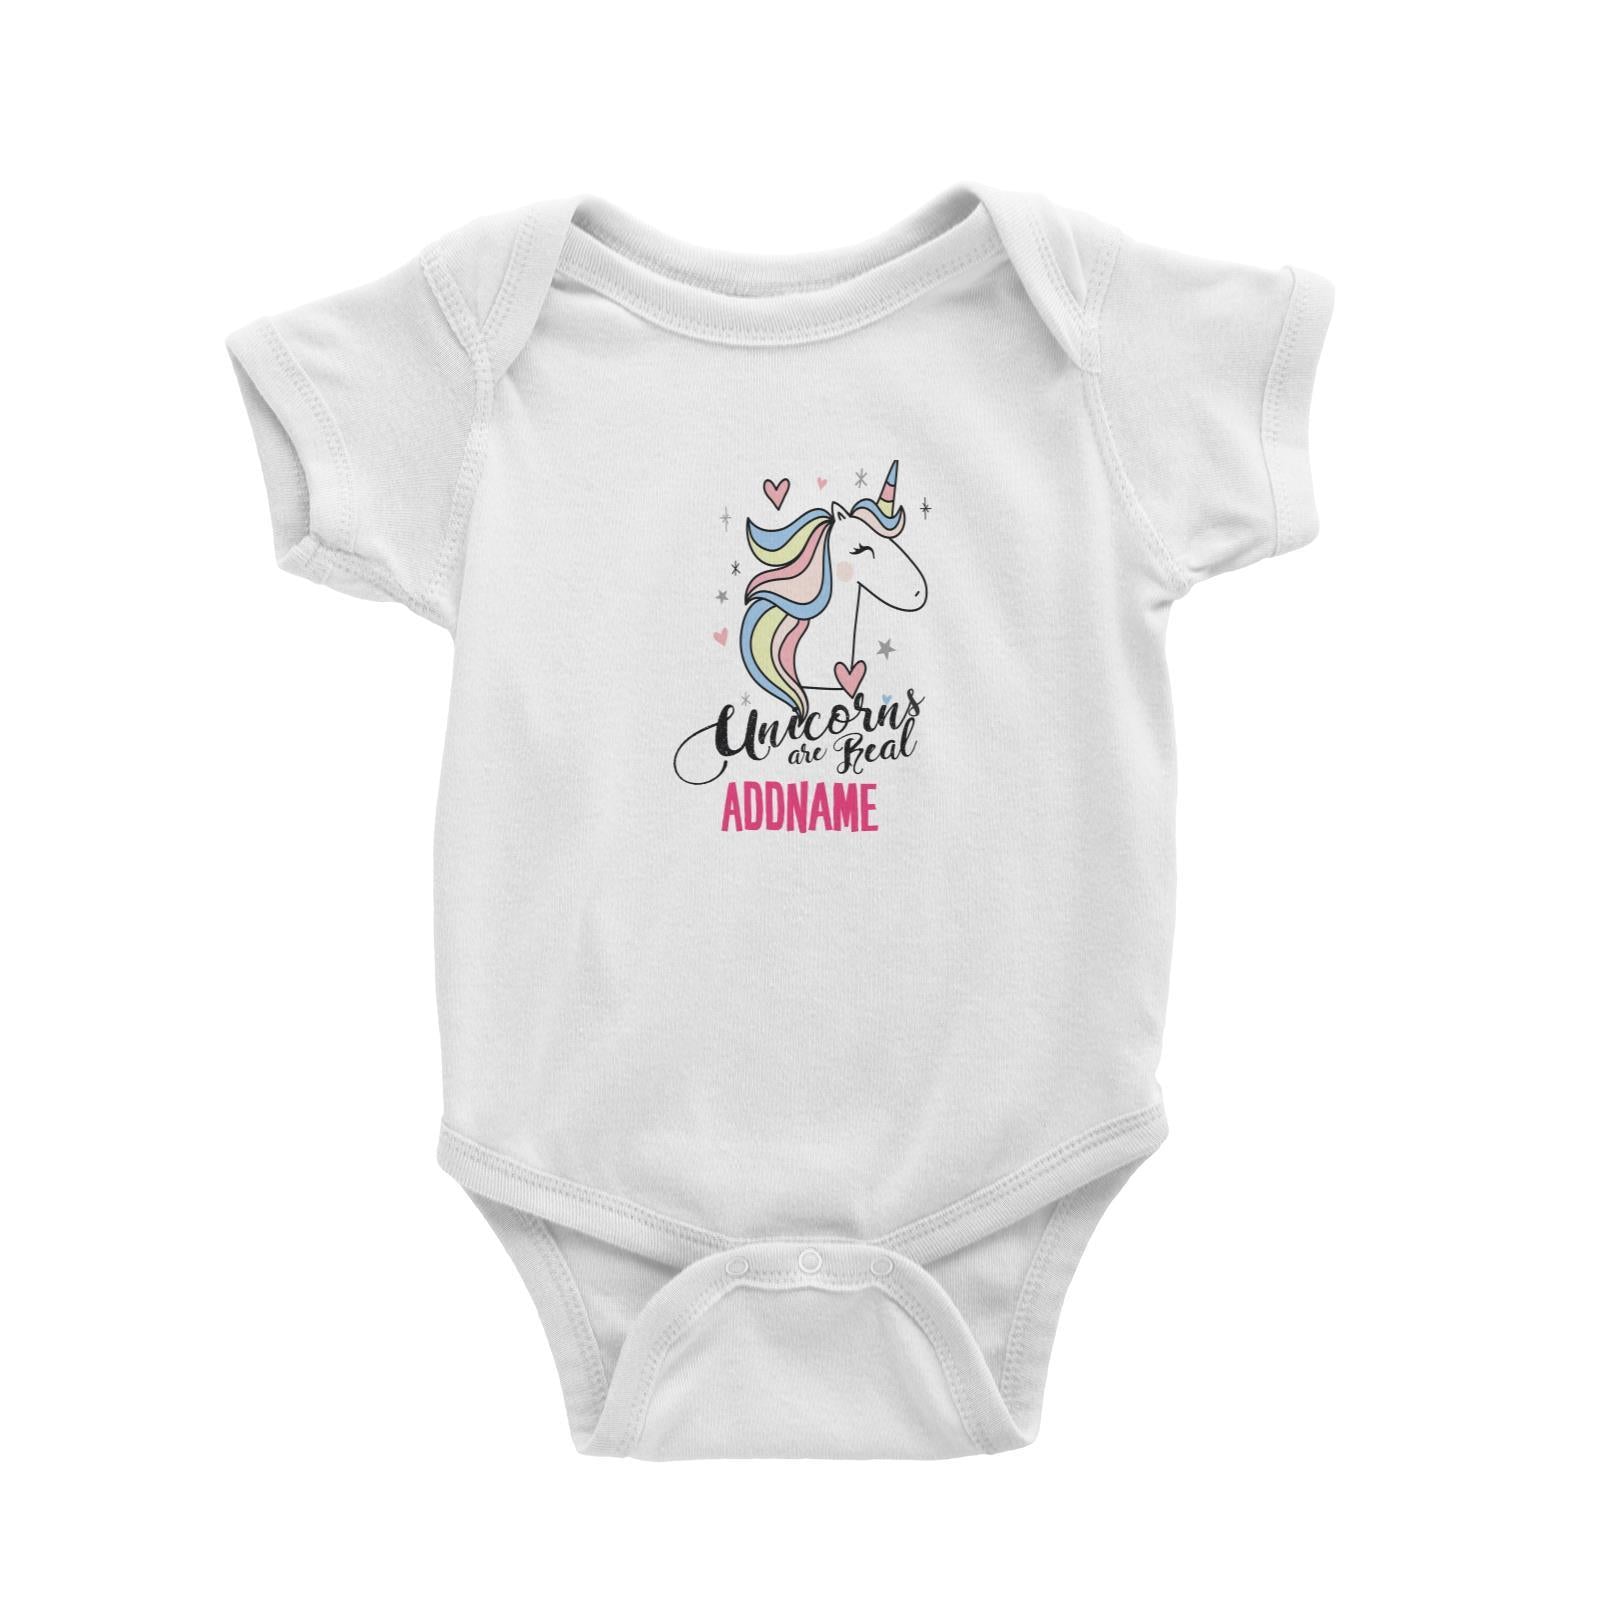 Cool Vibrant Series Unicorns Are Real Addname Baby Romper